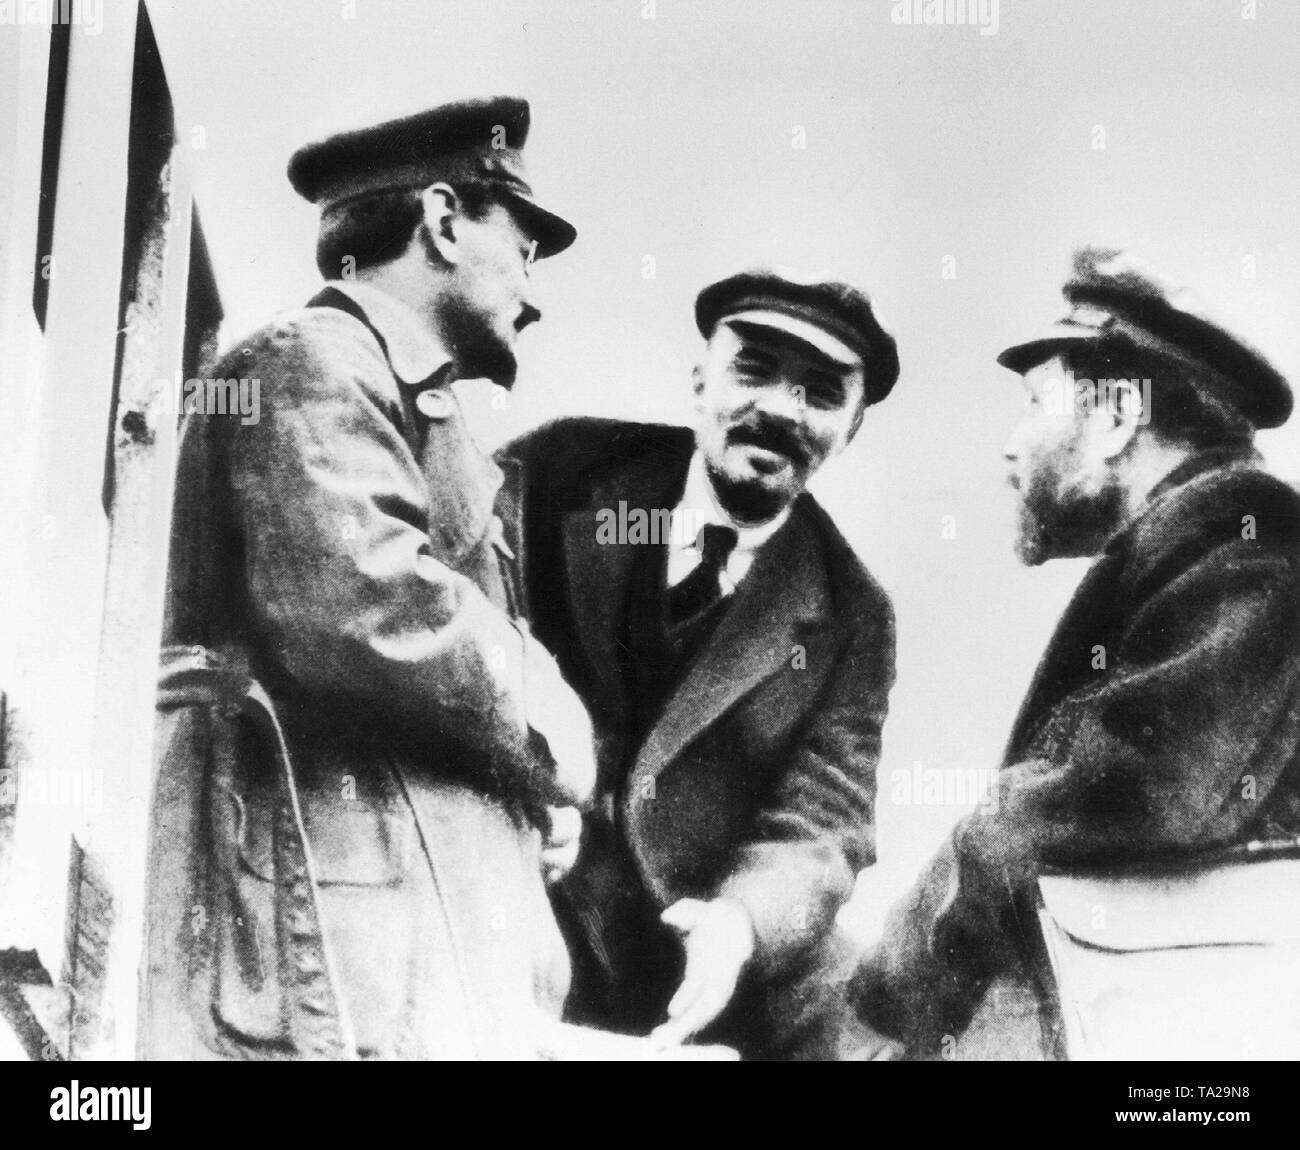 From left: Leon Trotsky, Vladimir Ilyich Lenin and Lev Kamenev in conversation during the Congress in Petrograd, which led to the formation of the Third Communist International (Comintern). Stock Photo